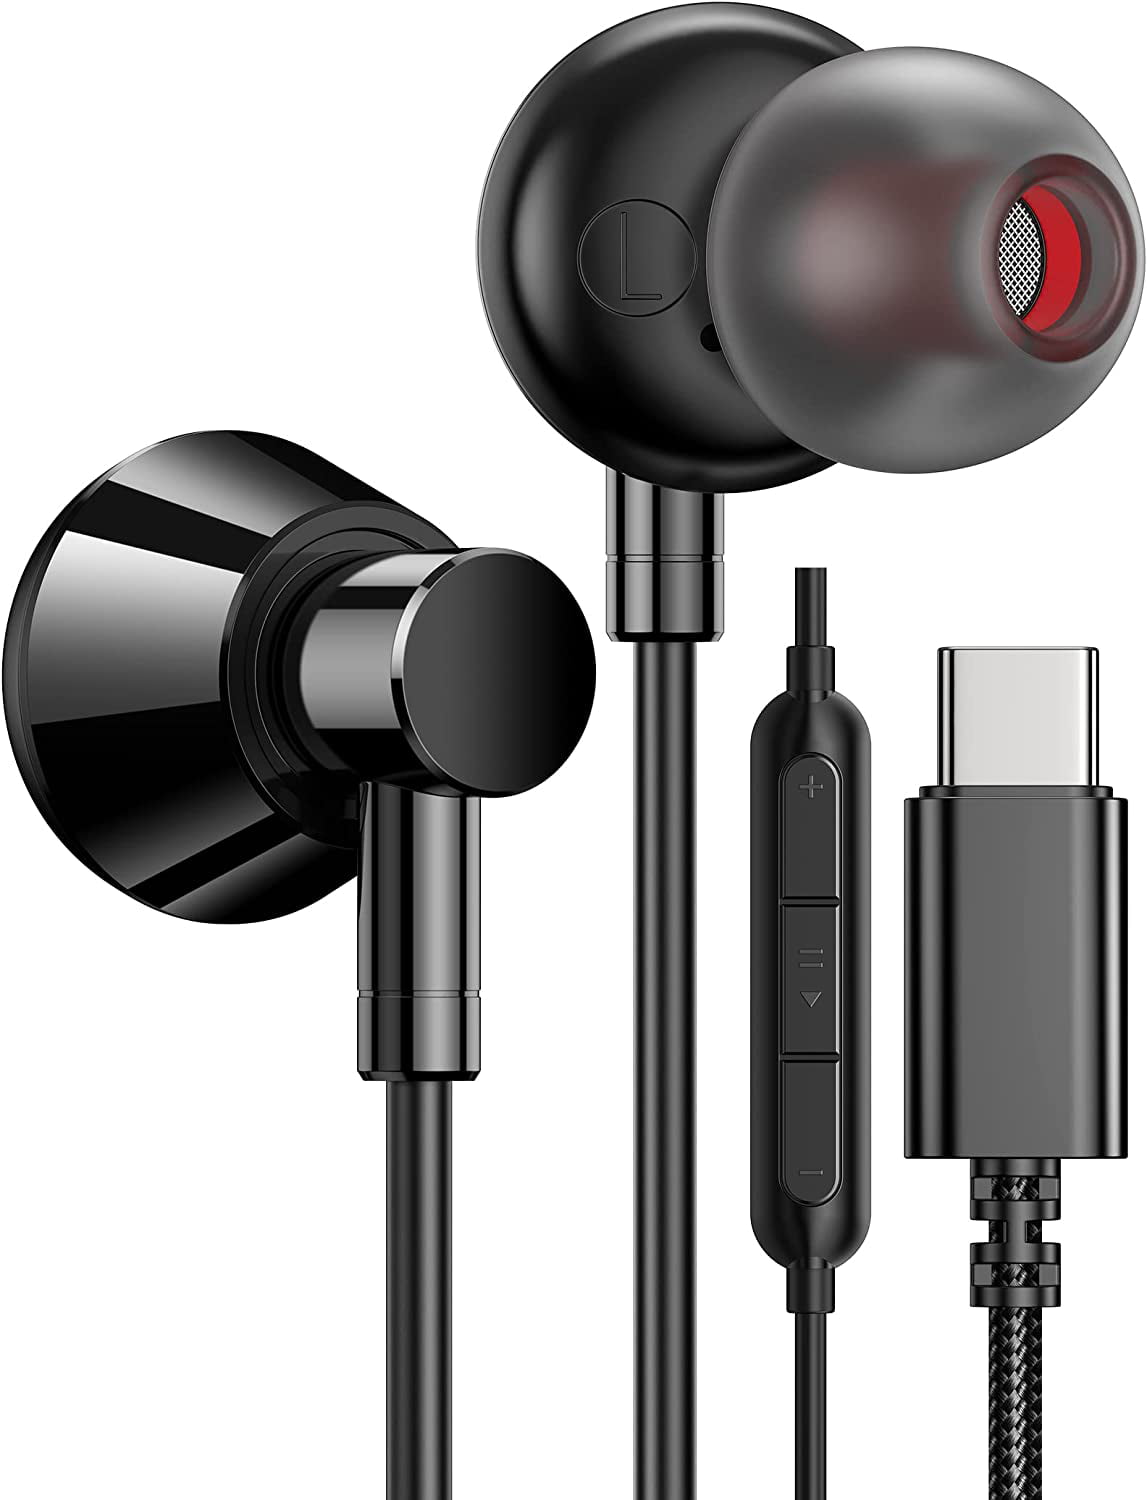 USB C Headphones, USB Type C Stereo in-Ear Earbuds Digital DAC Bass Noise Cancelling s w/h Mic Remote - Walmart.com